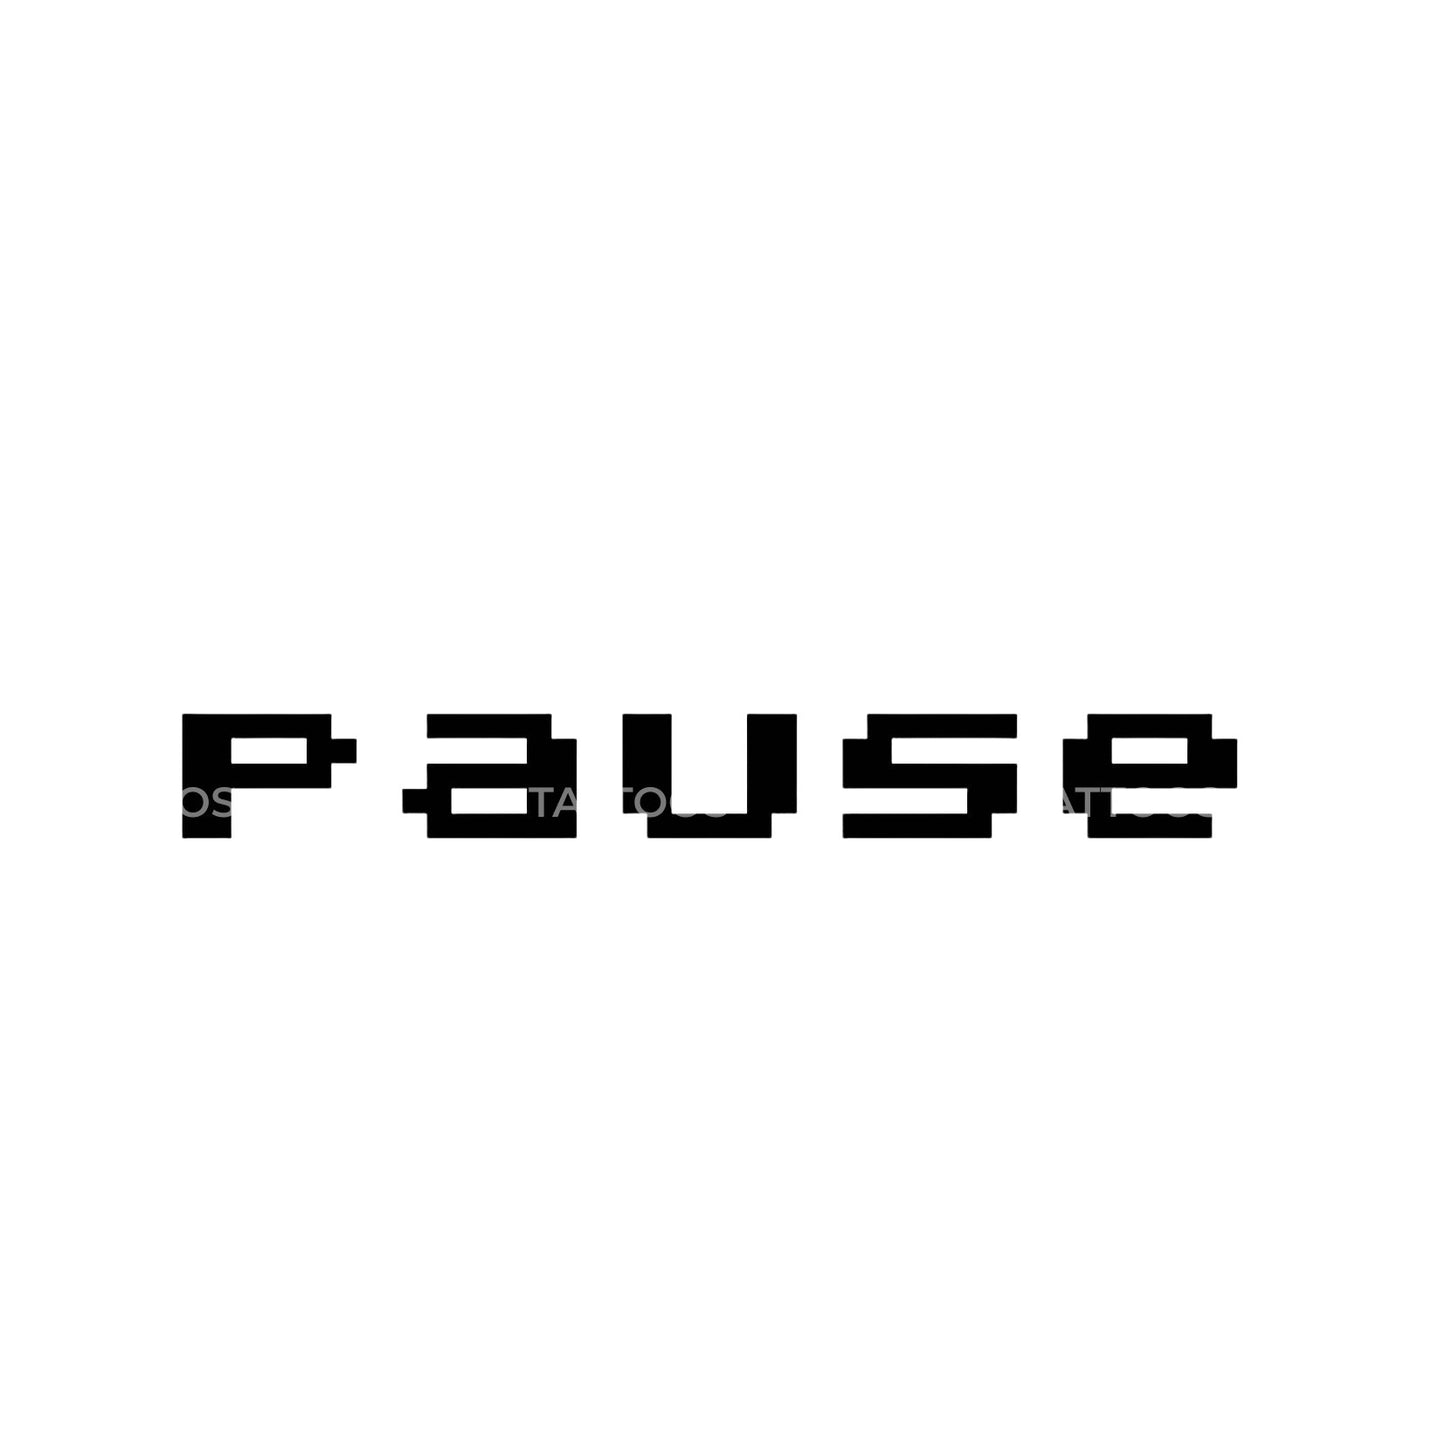 Video Games Pause Lettering Tattoo Design